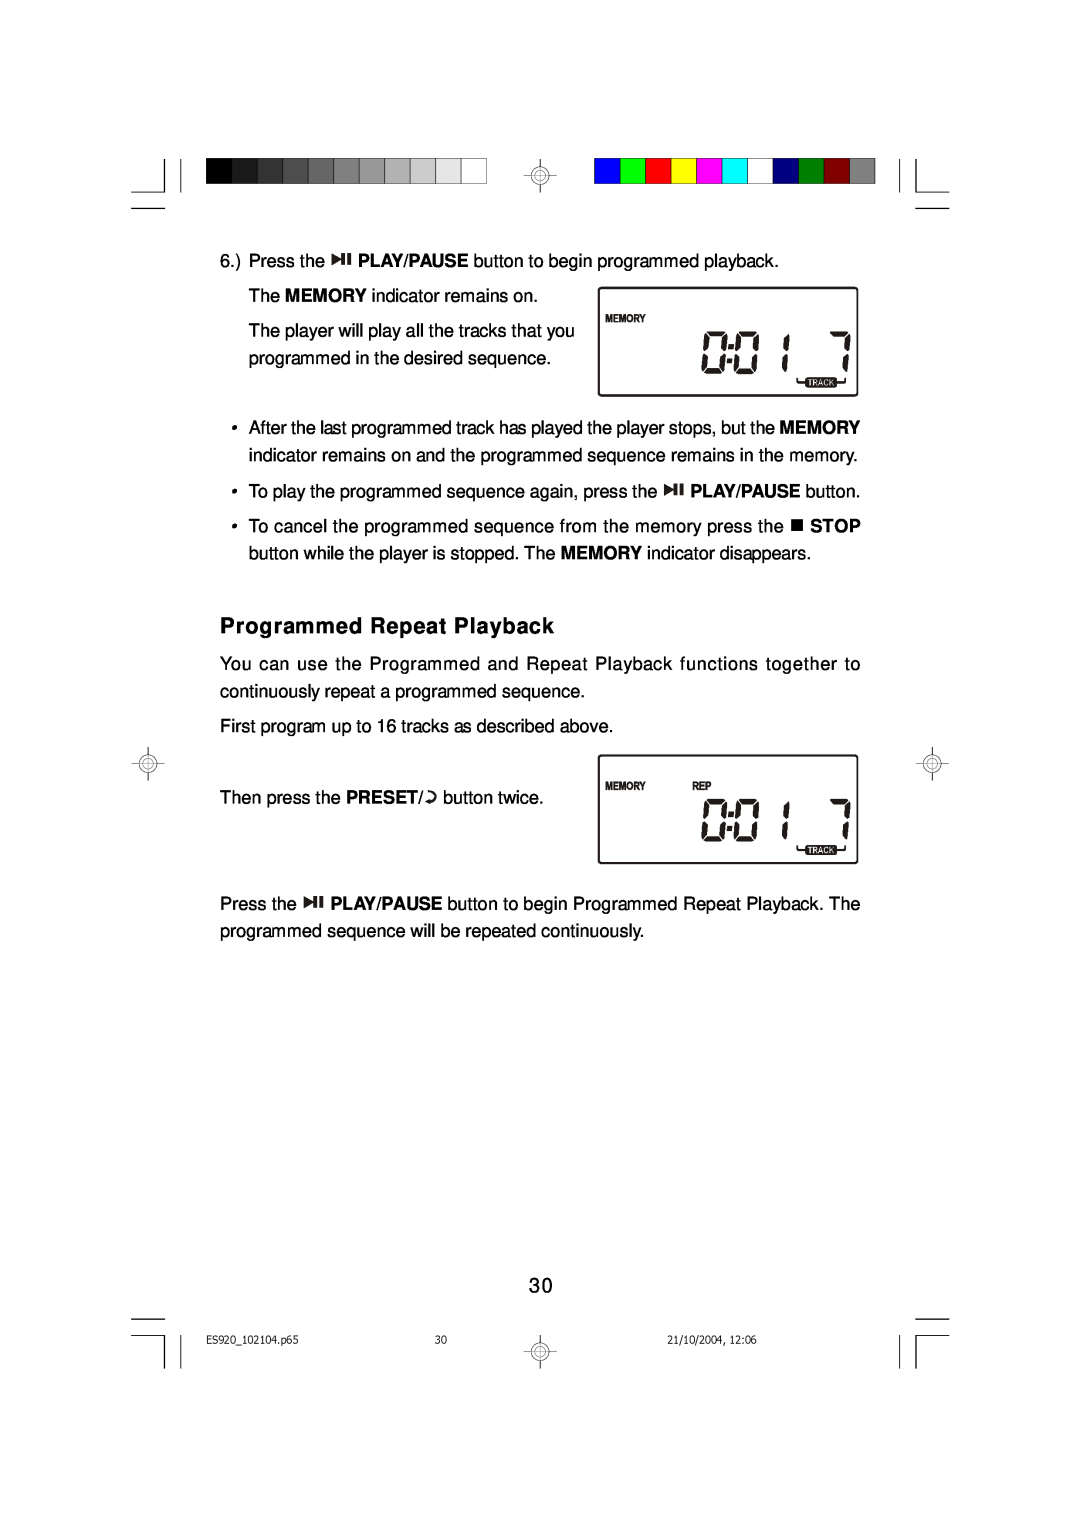 Emerson ES920 owner manual Programmed Repeat Playback 